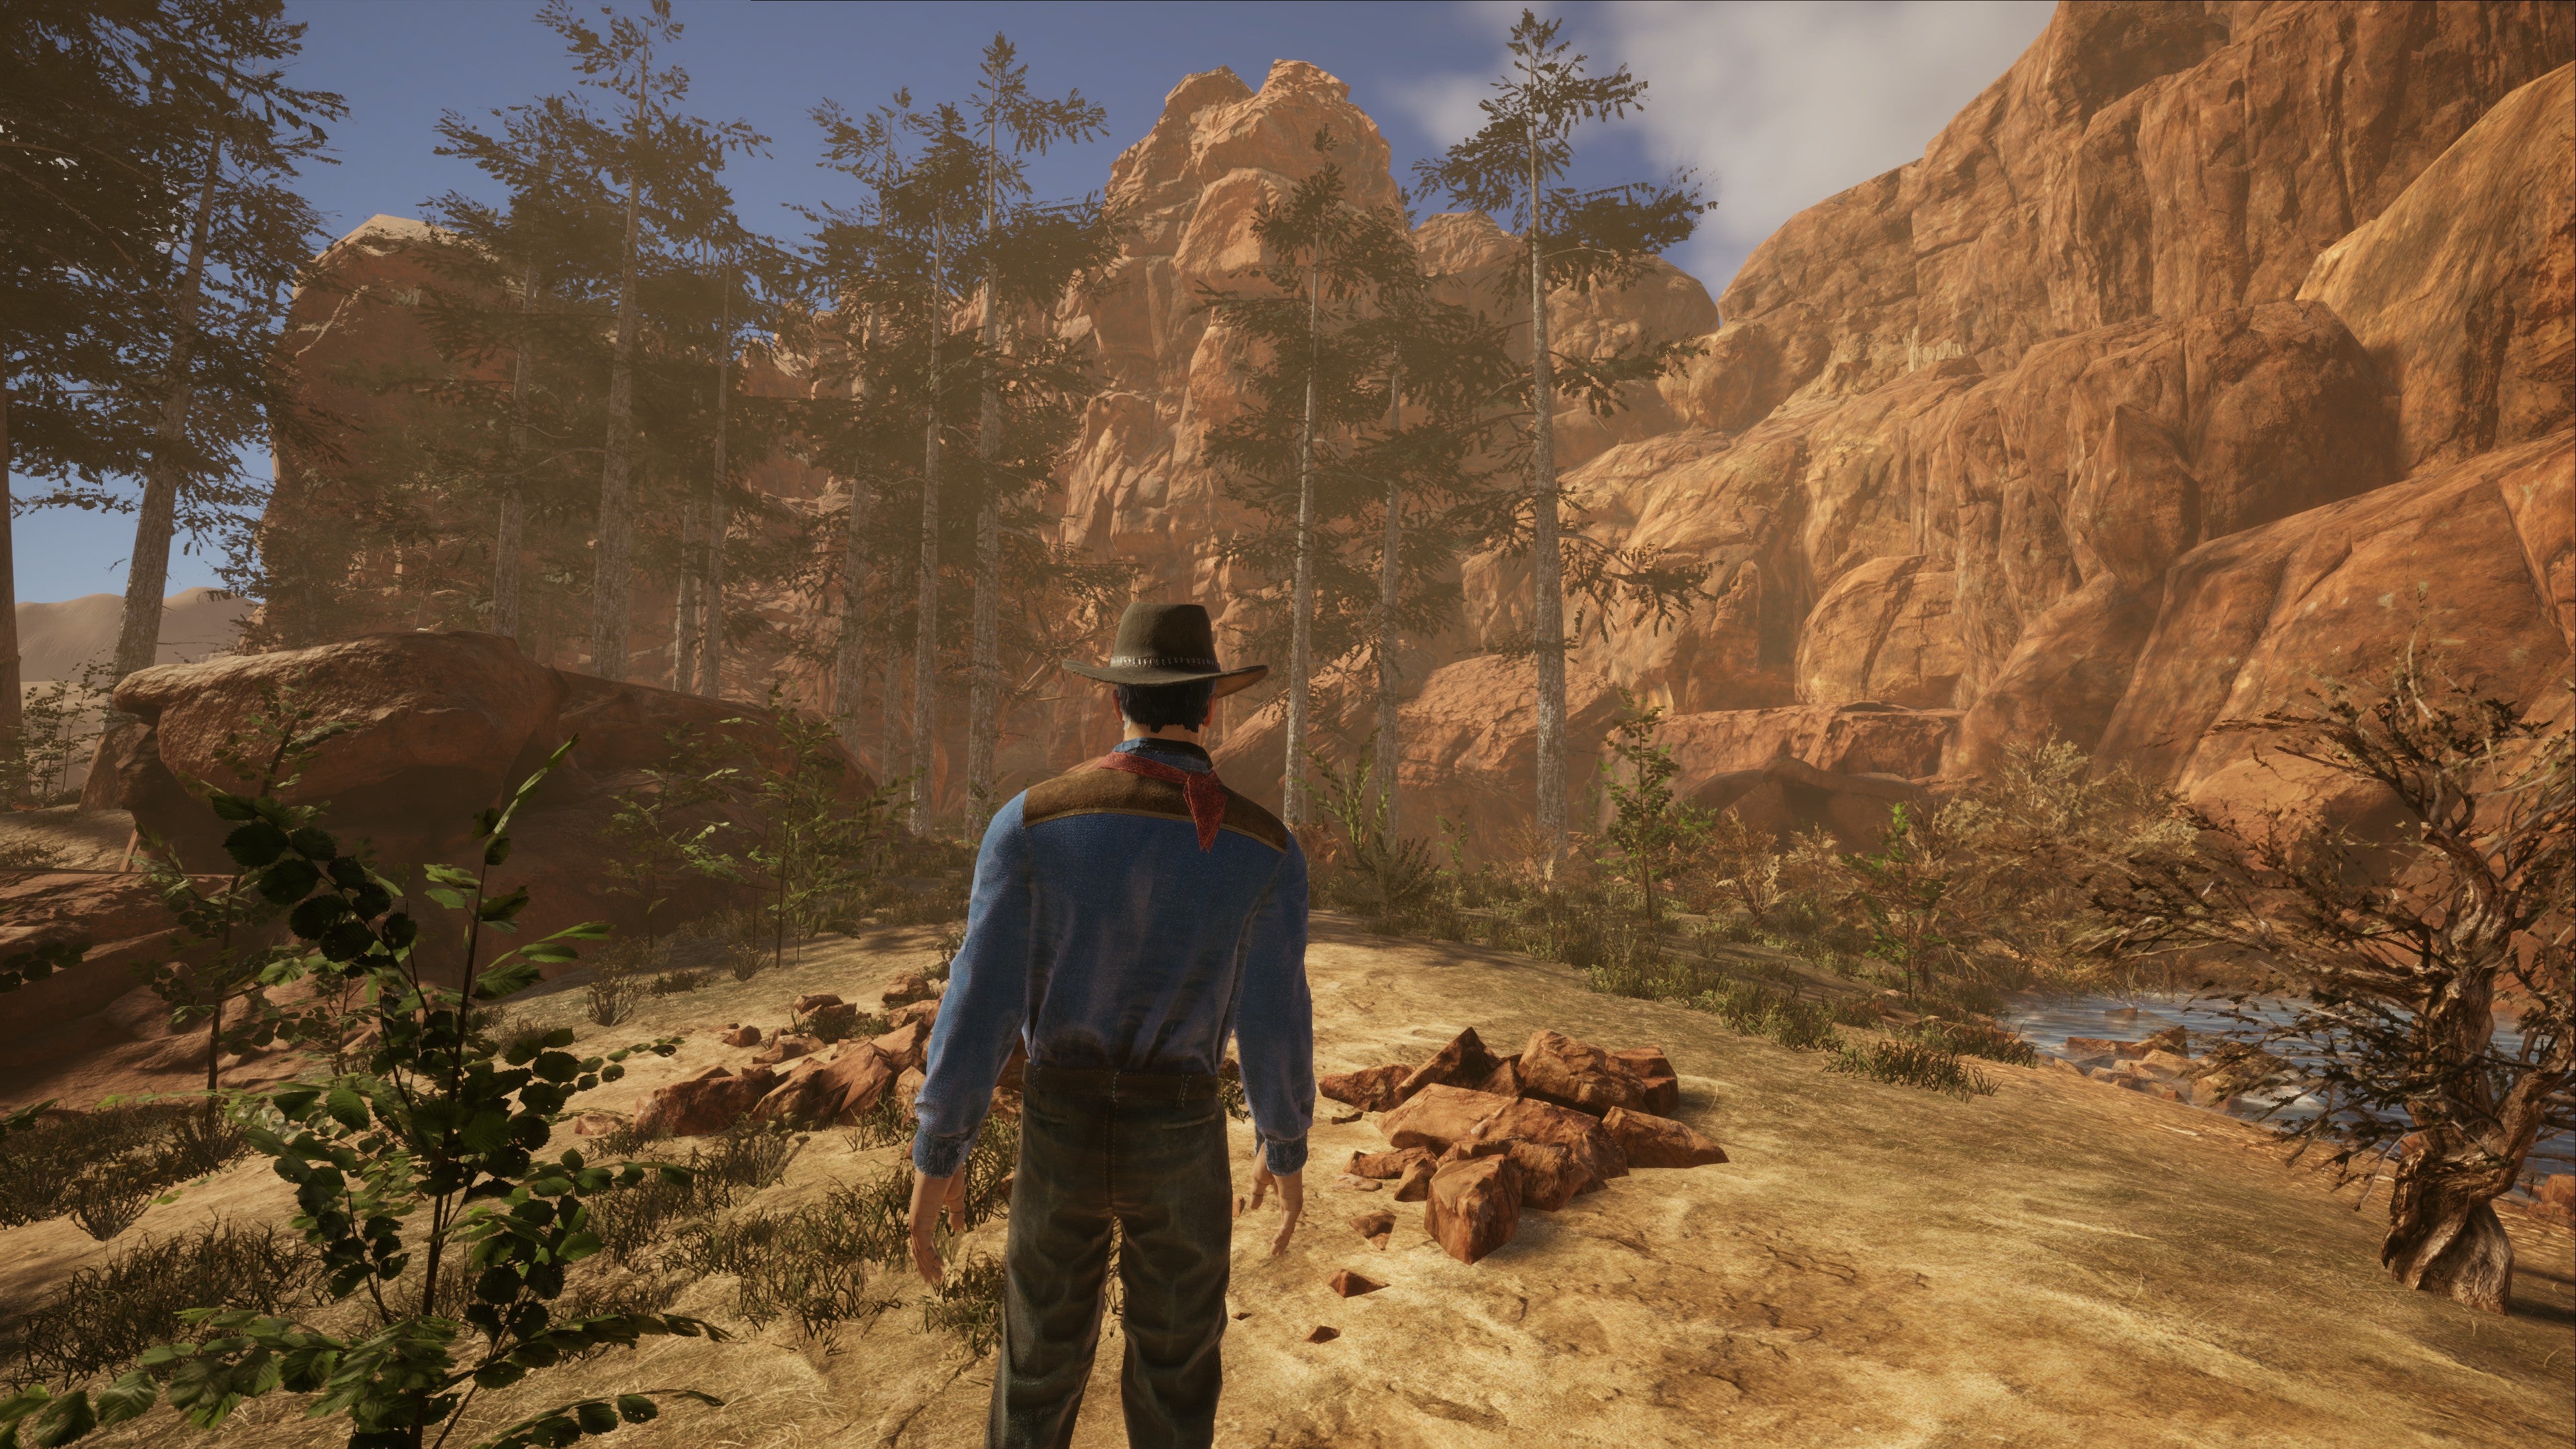 Screenshot for the game Wild West Dynasty